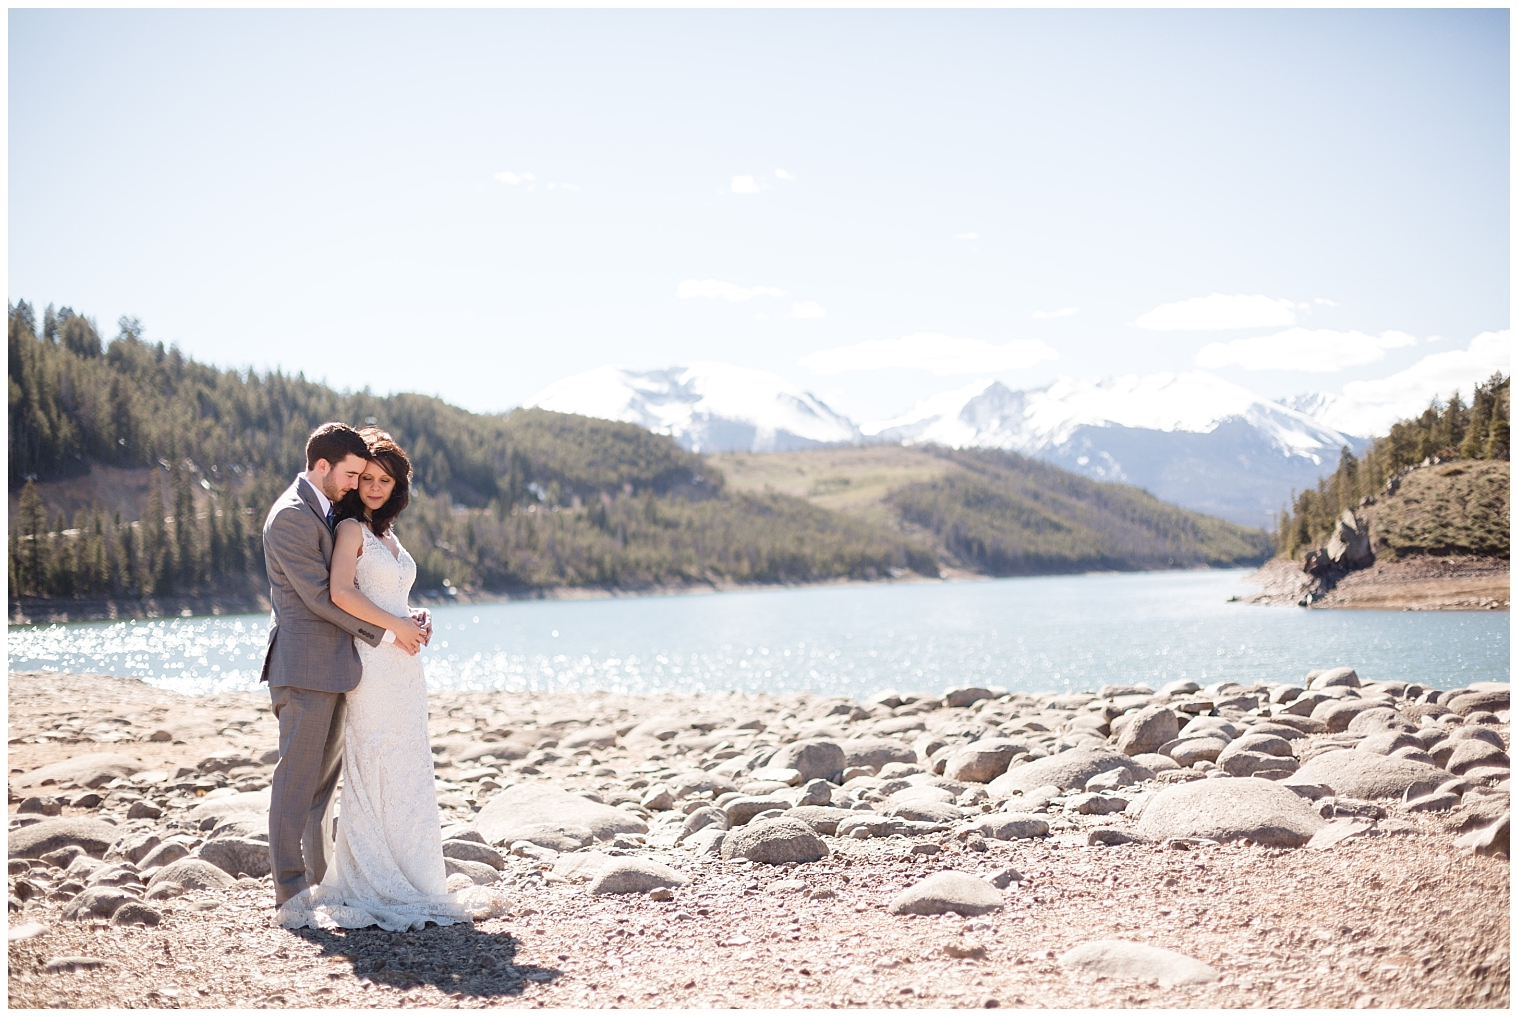 Groom holds his bride during portraits at their Breckenridge elopement.